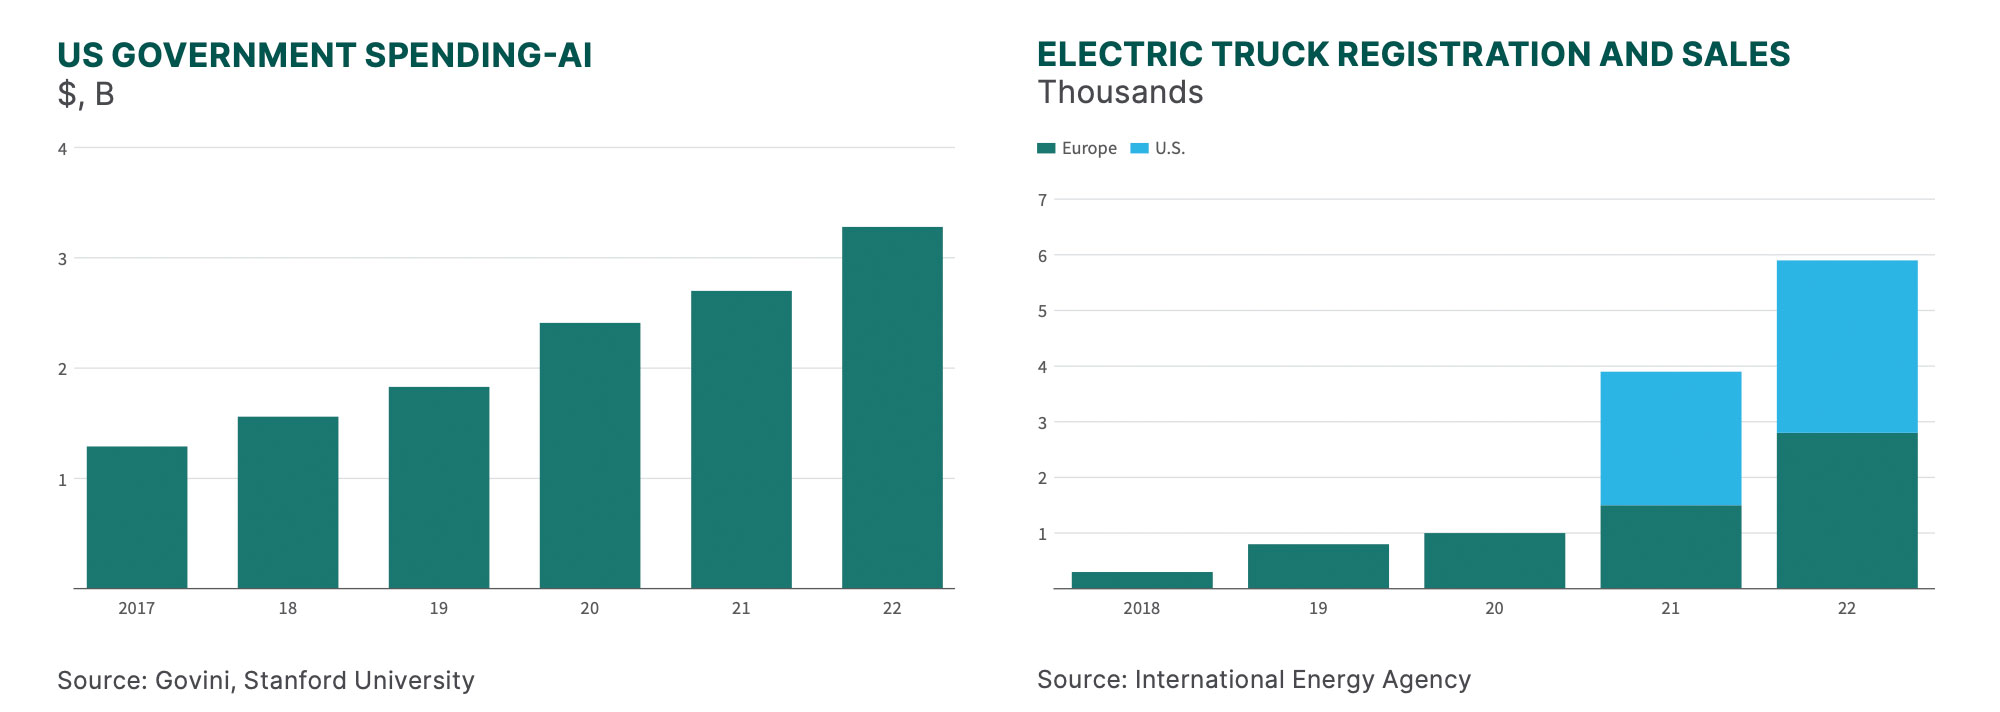 US Goverment spending AI and Electric truck registration and sales 